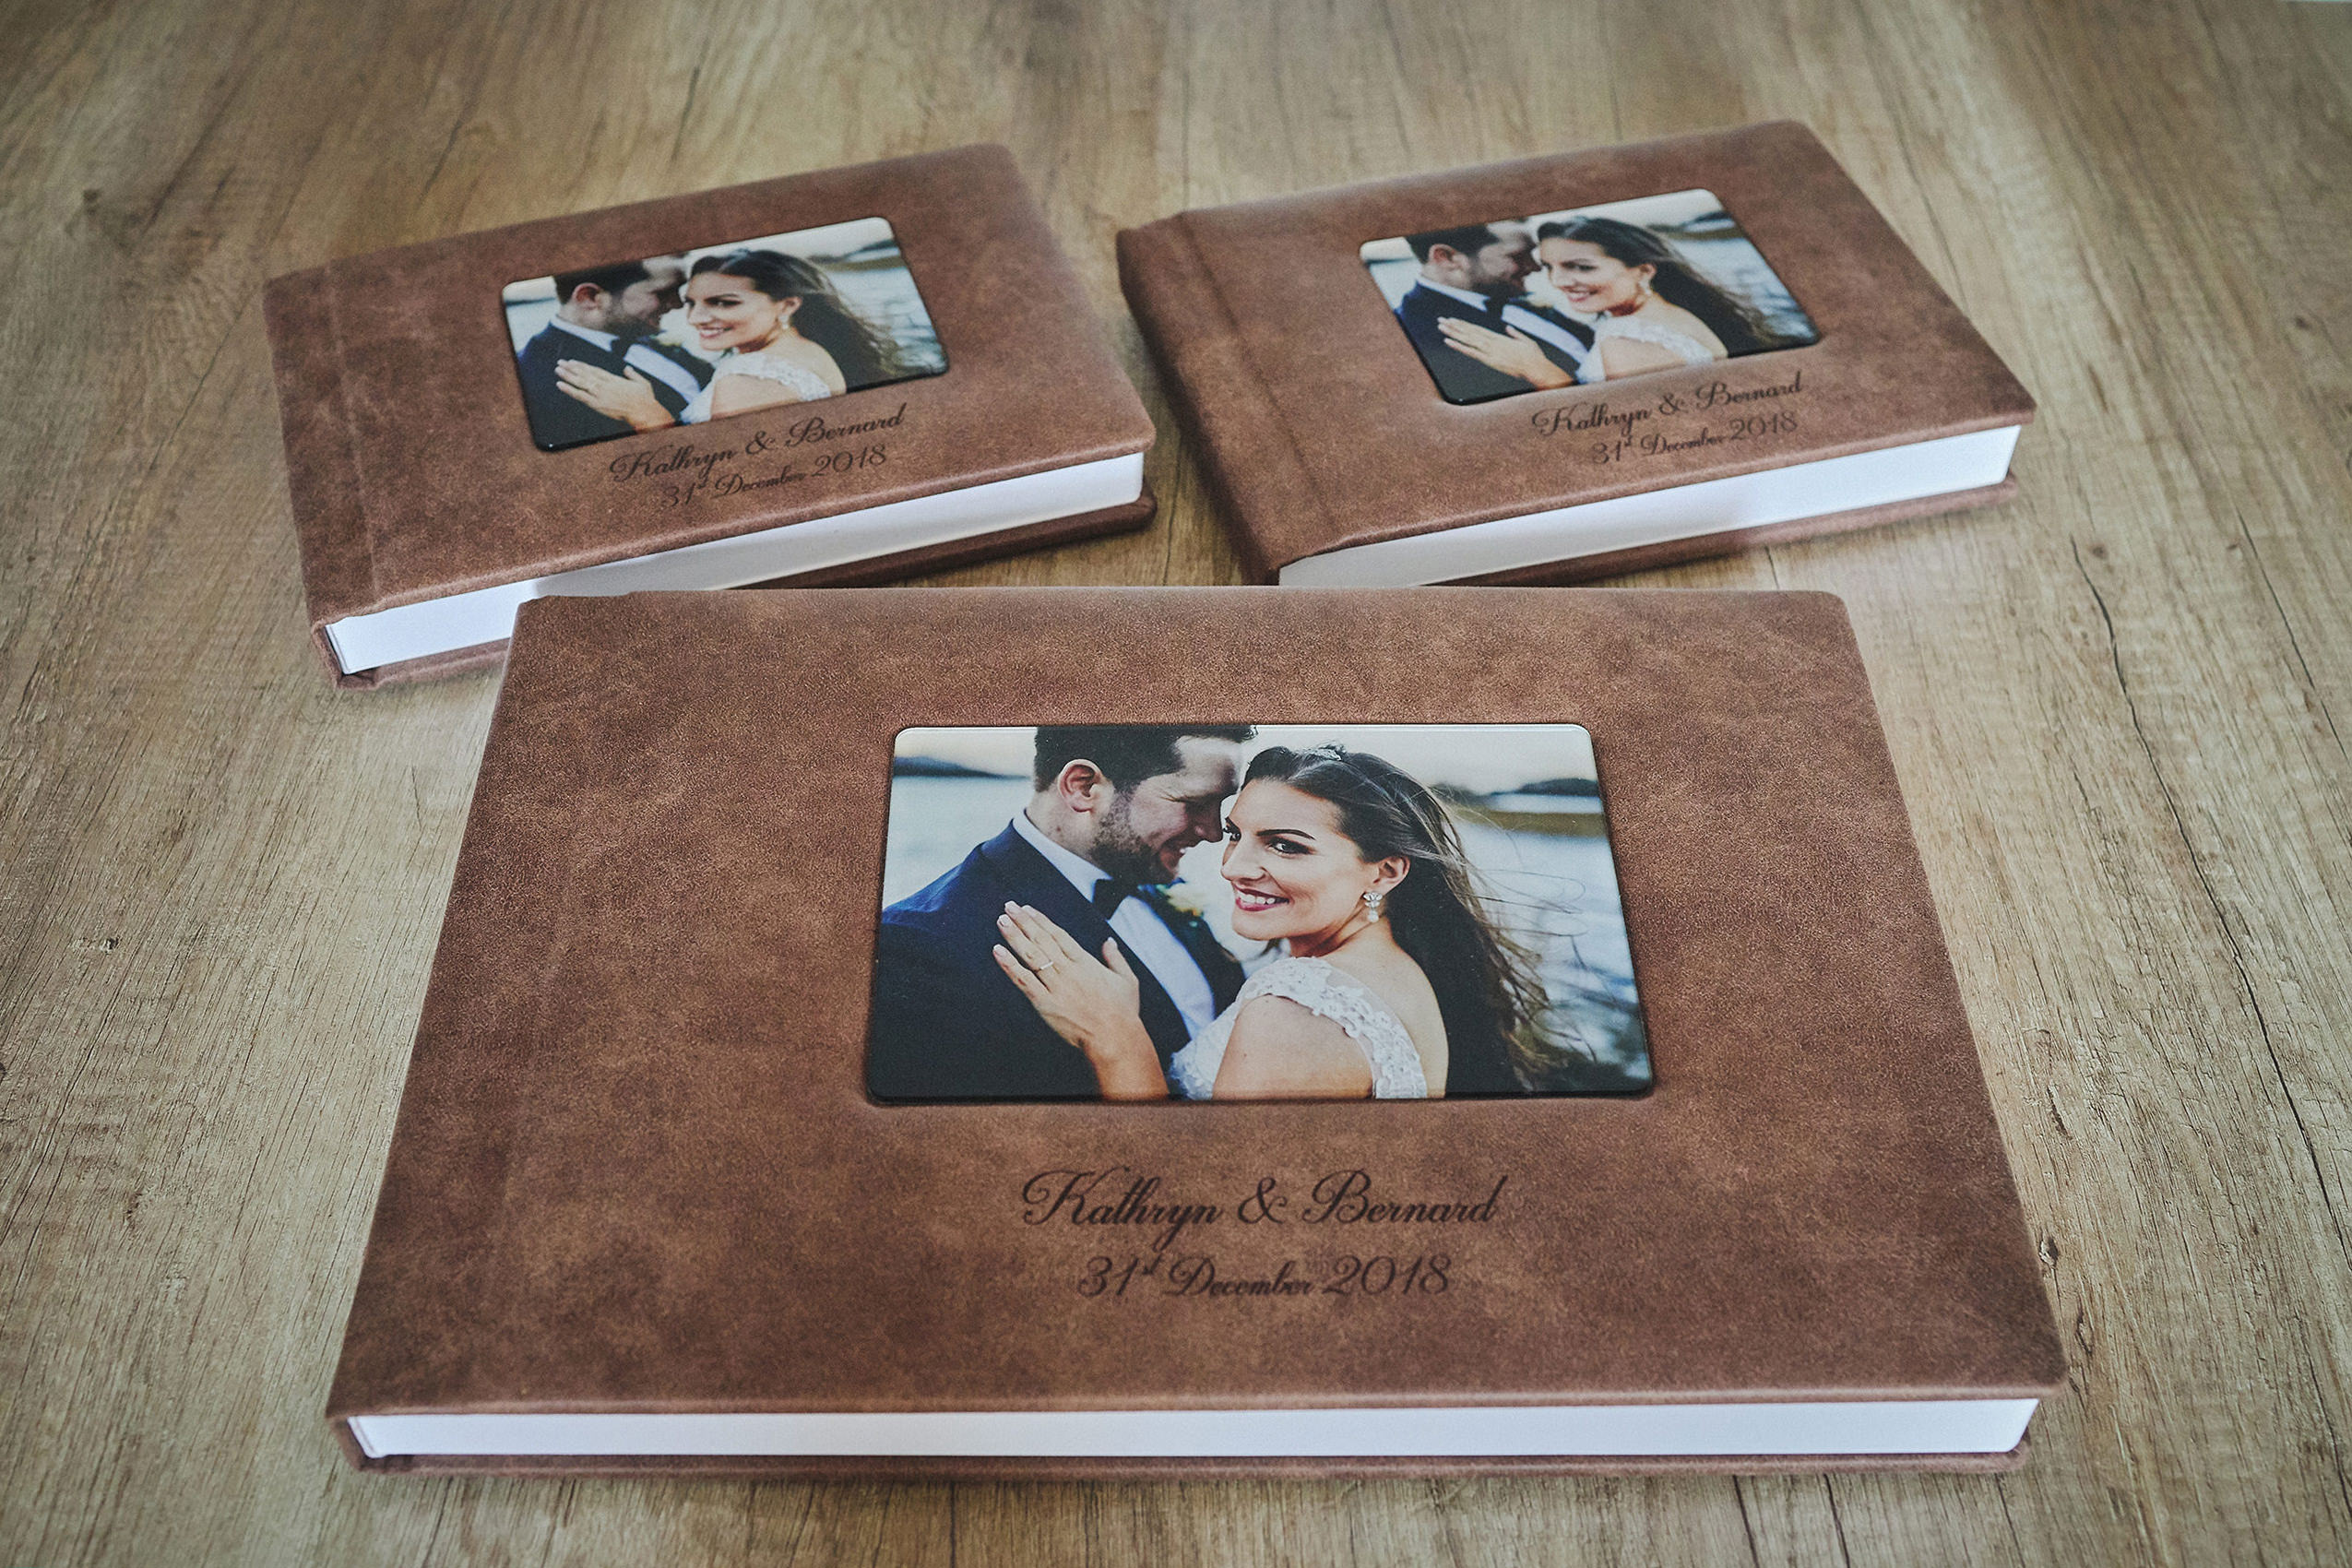 Wedding Albums Payment Plan and prices in Ireland?